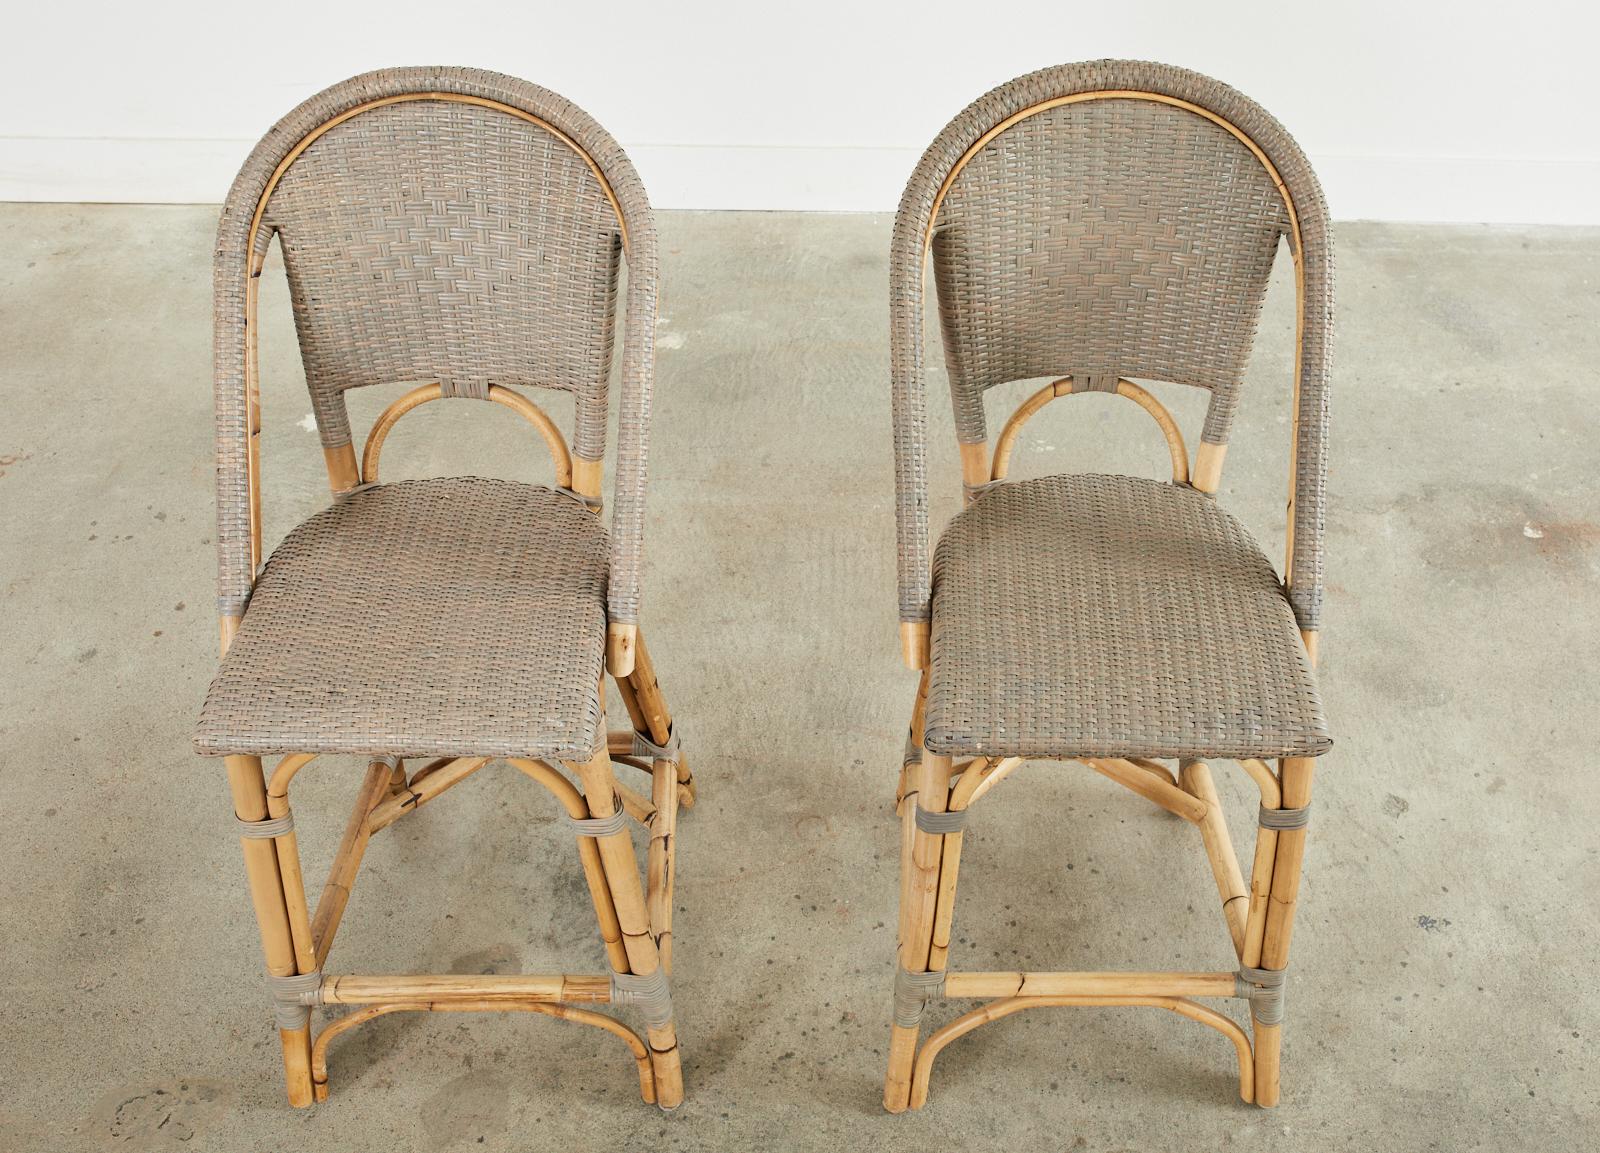 Woven Set of Six Serena and Lily Rattan Wicker Counter Height Barstools